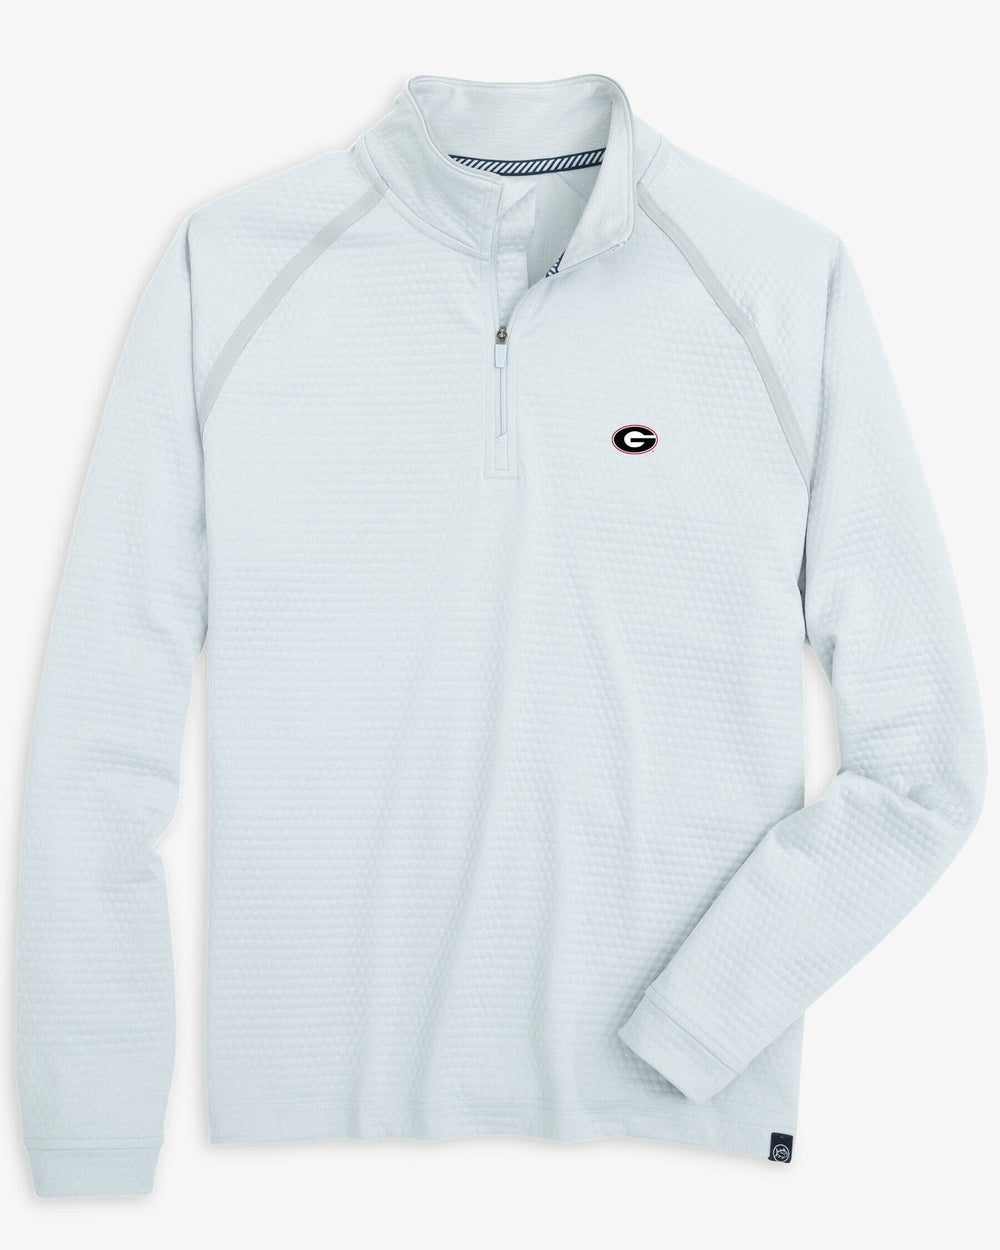 The front view of the Georgia Oval G Bulldgos Scuttle Heather Quarter Zip by Southern Tide - Heather Slate Grey